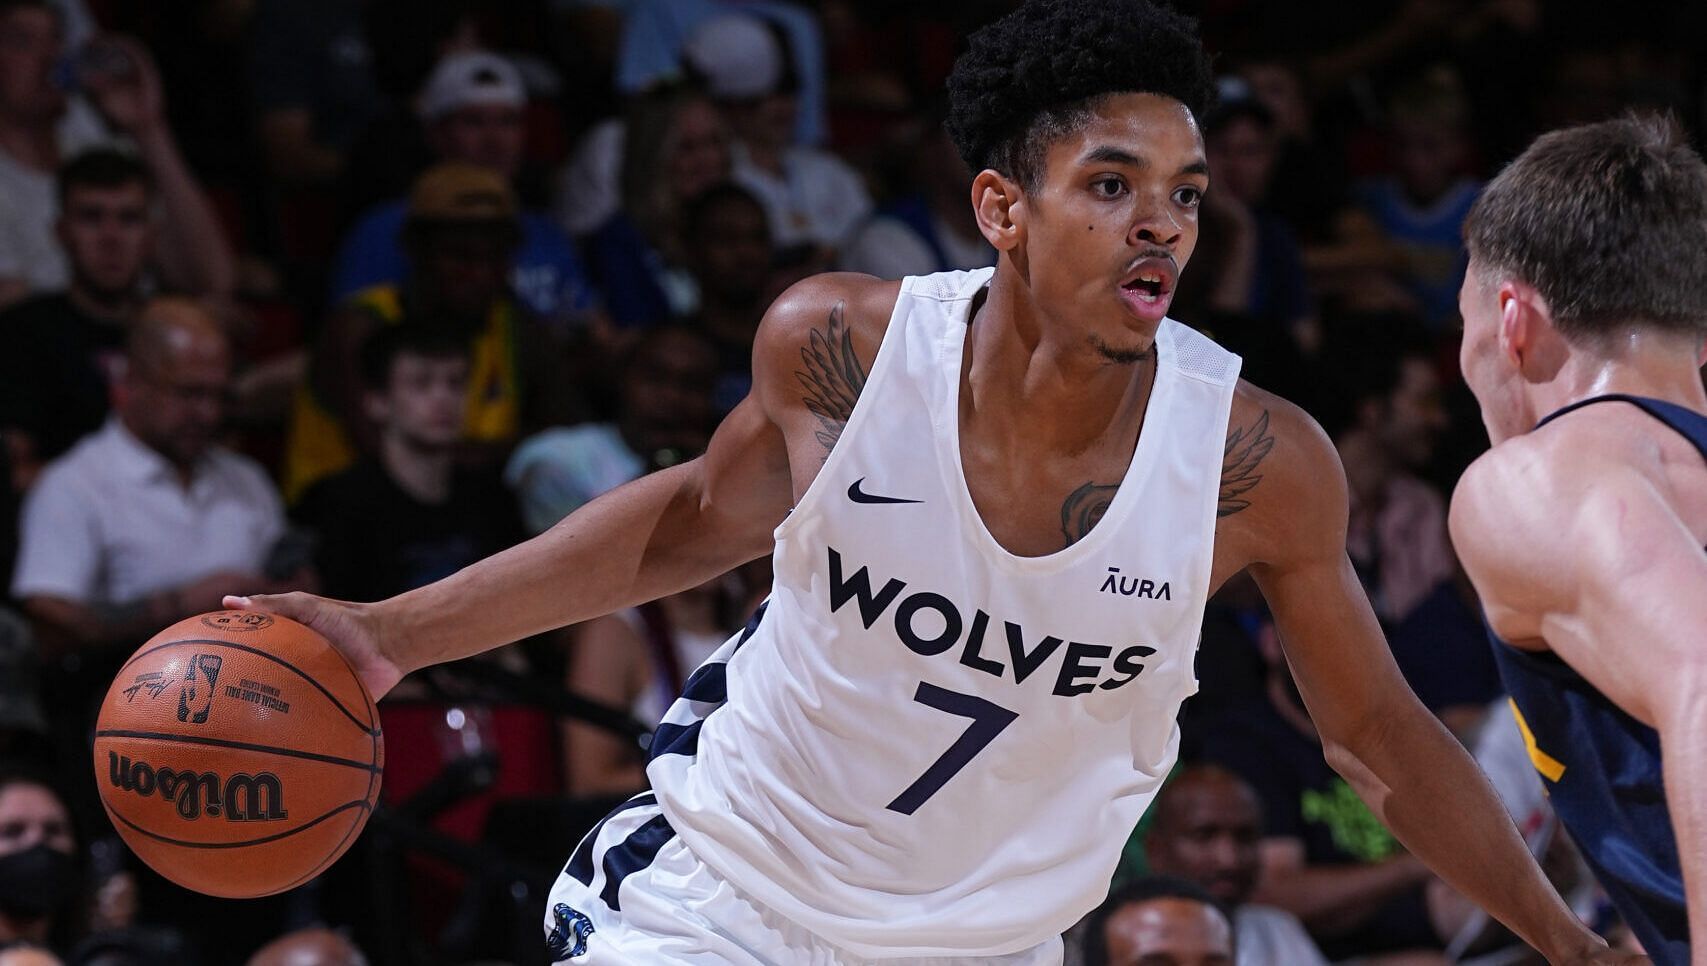 Minnesota Timberwolves faced off against the Denver Nuggets at Summer League 2022 [Source: NBA]